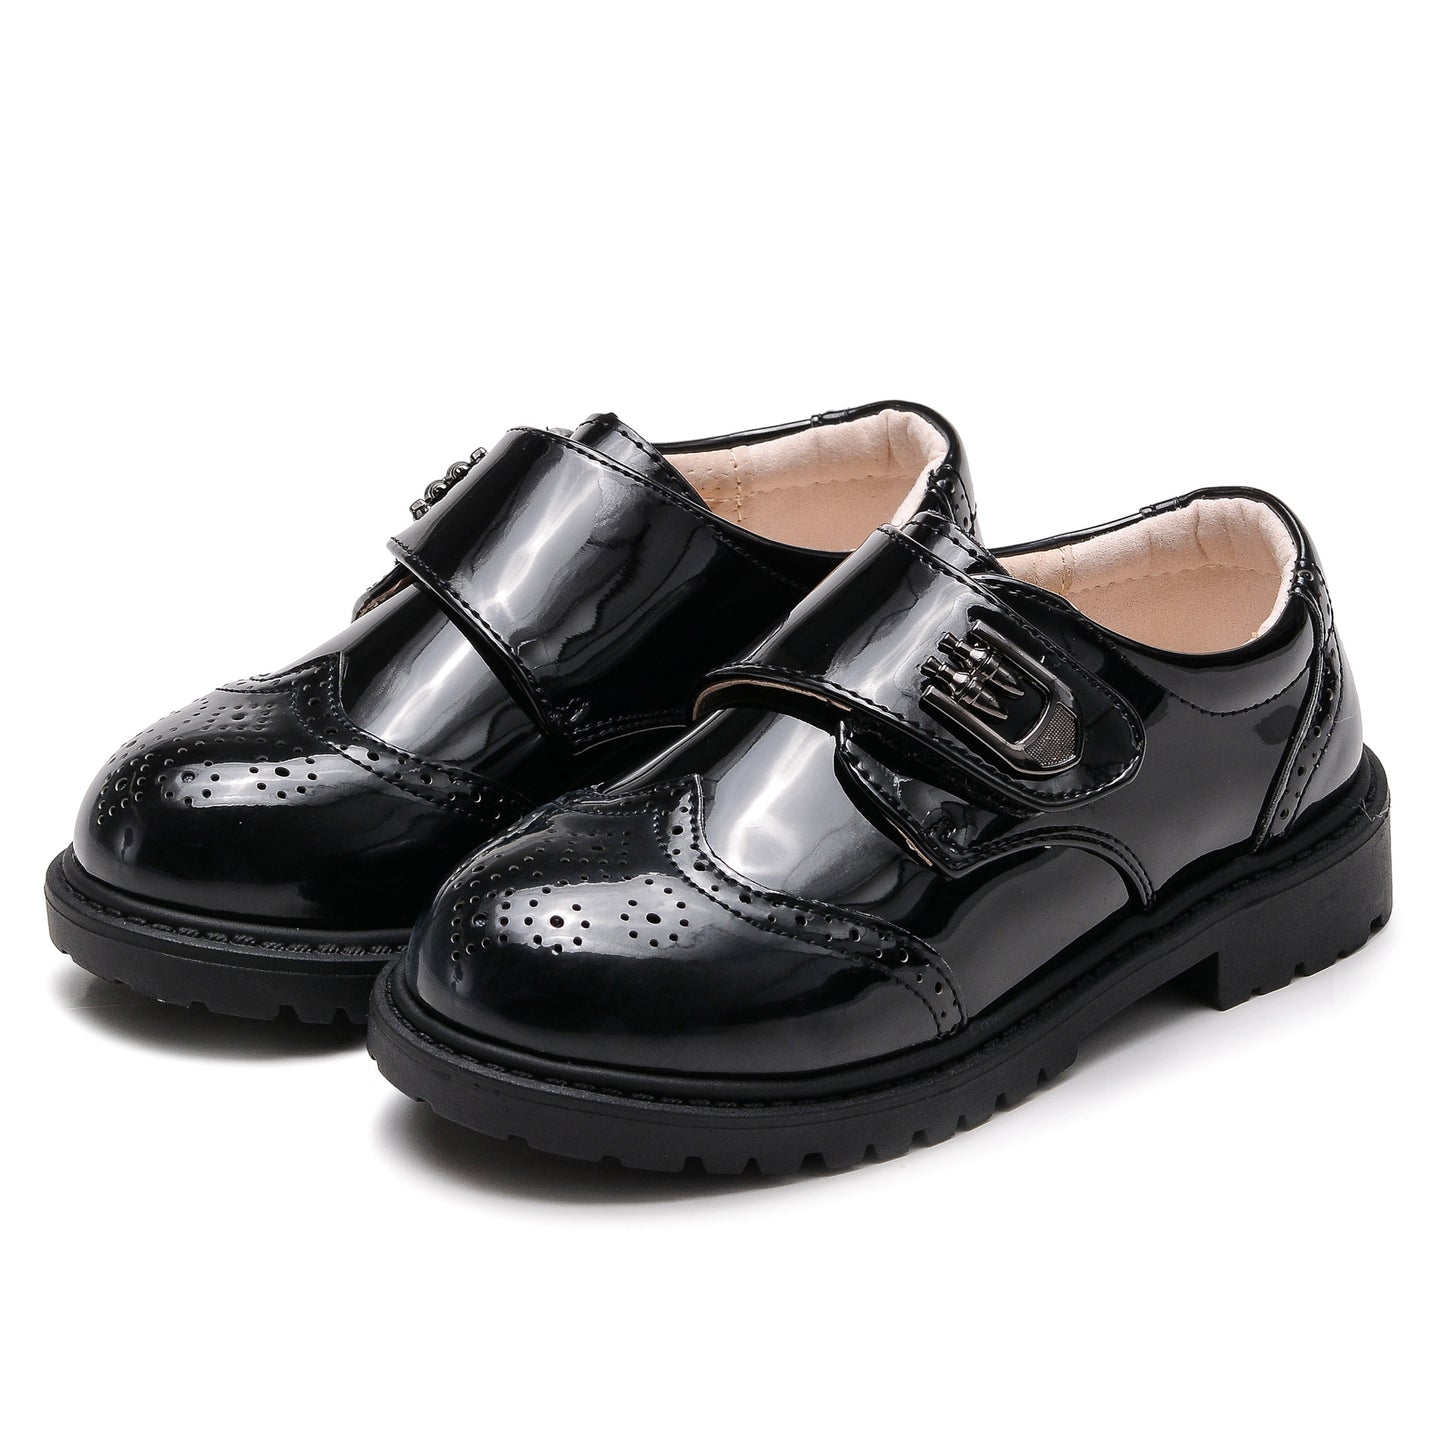 Boys' Leather Student Performance Shoes